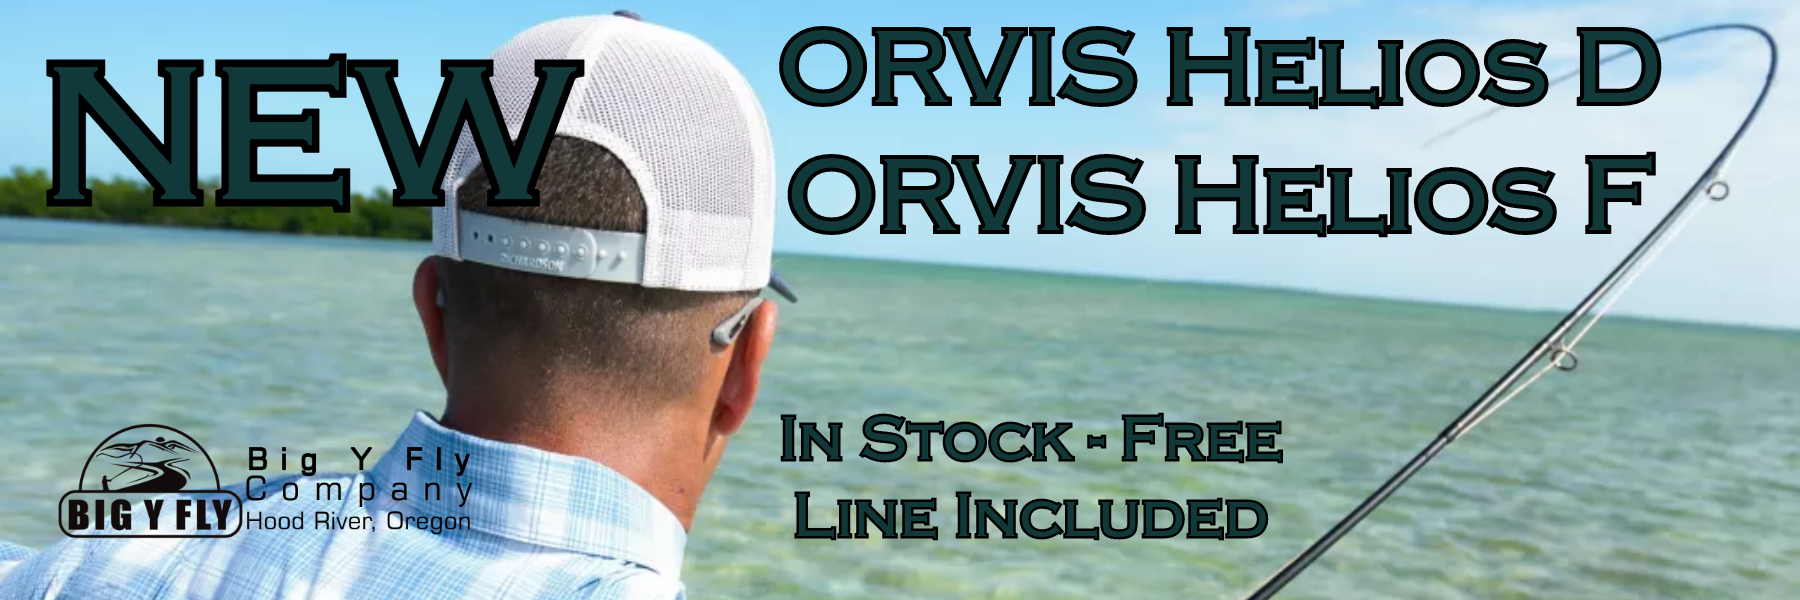 New Orvis Helios Fly Rods — Big Y Fly Co